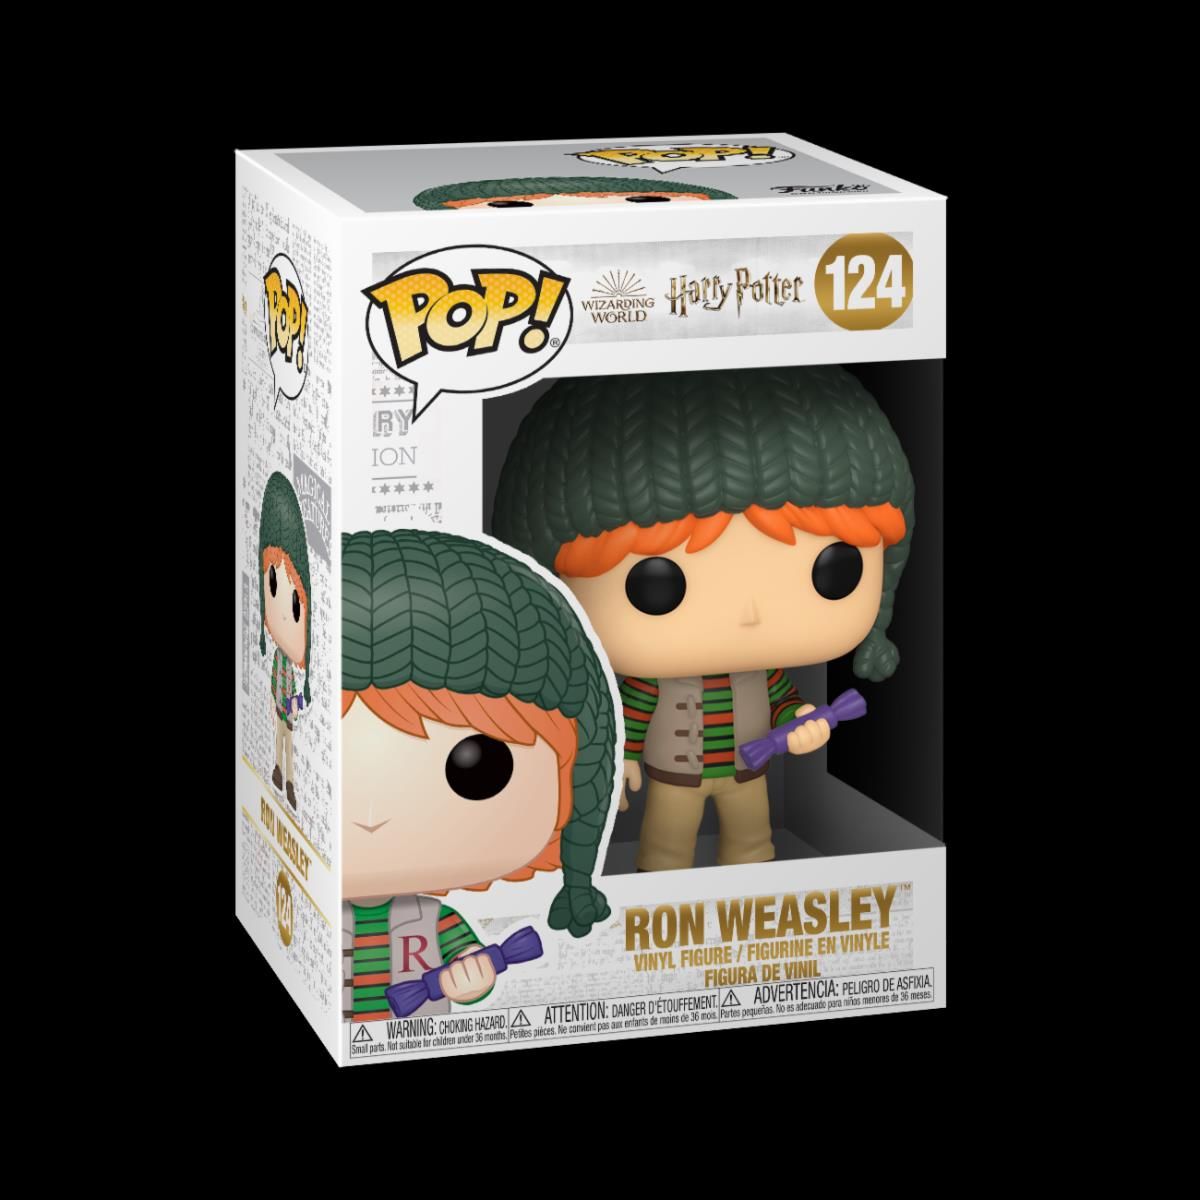 Funko Pop! Harry Potter S11 Holiday Ron Weasley